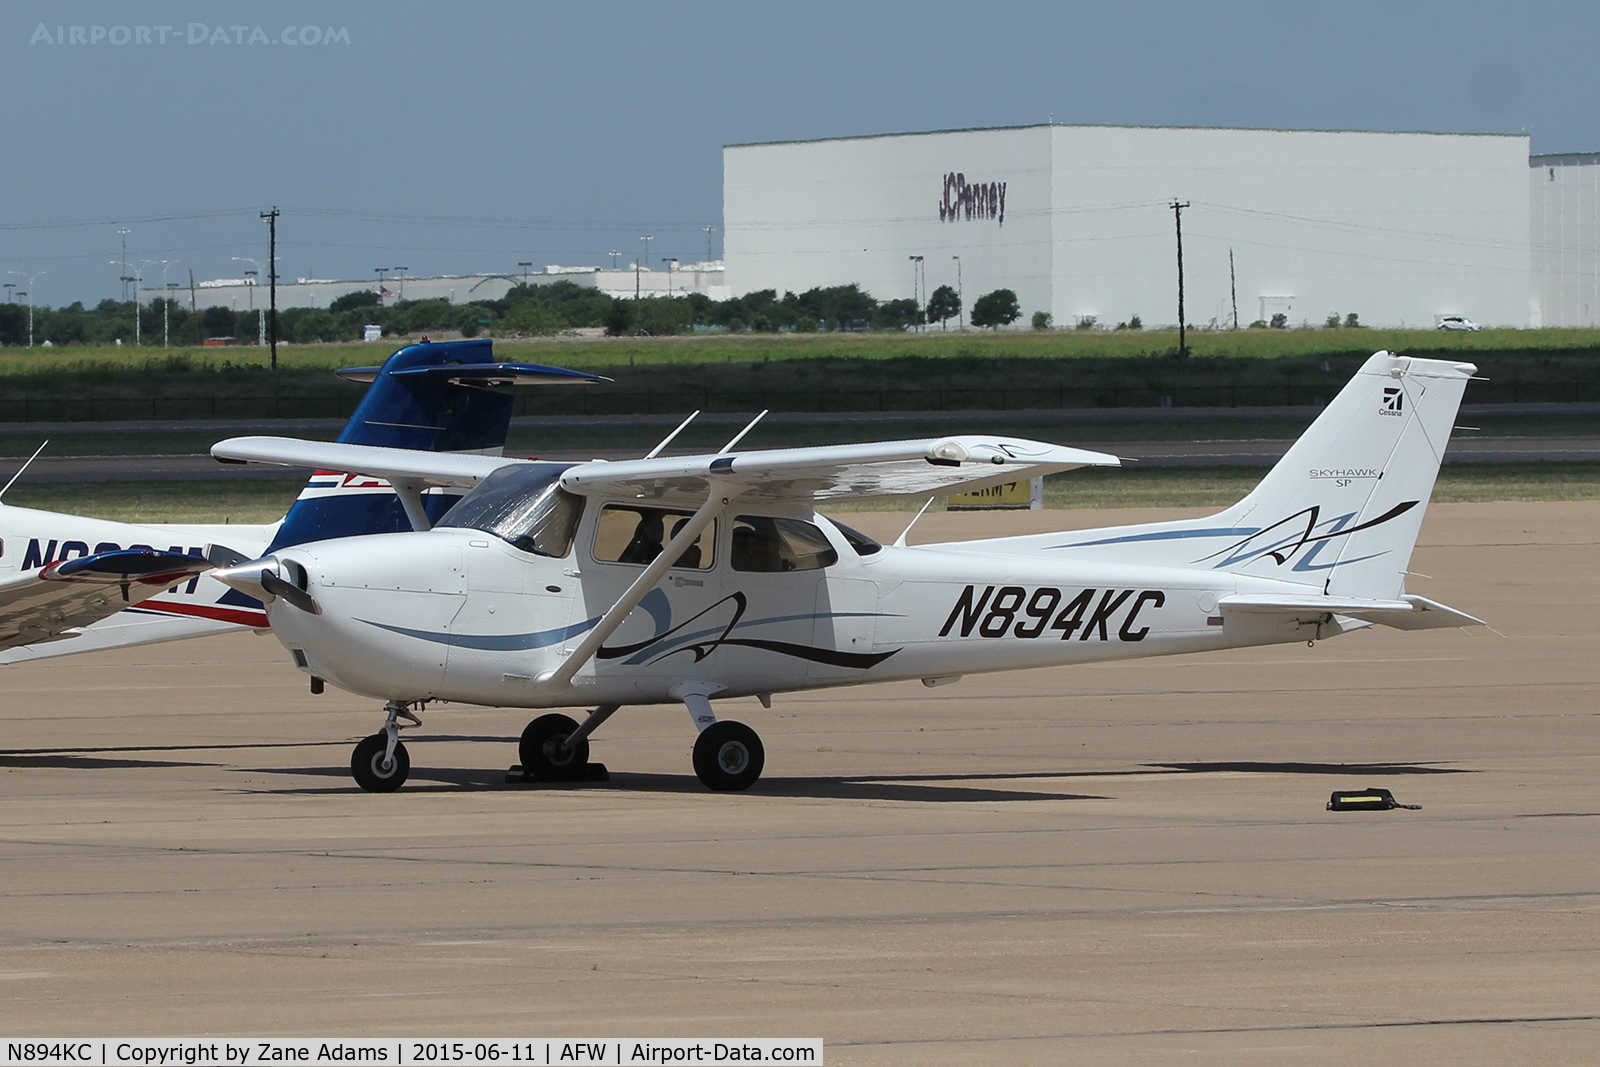 N894KC, 2008 Cessna 172S C/N 172S10742, At Alliance Airport - Fort Worth, TX